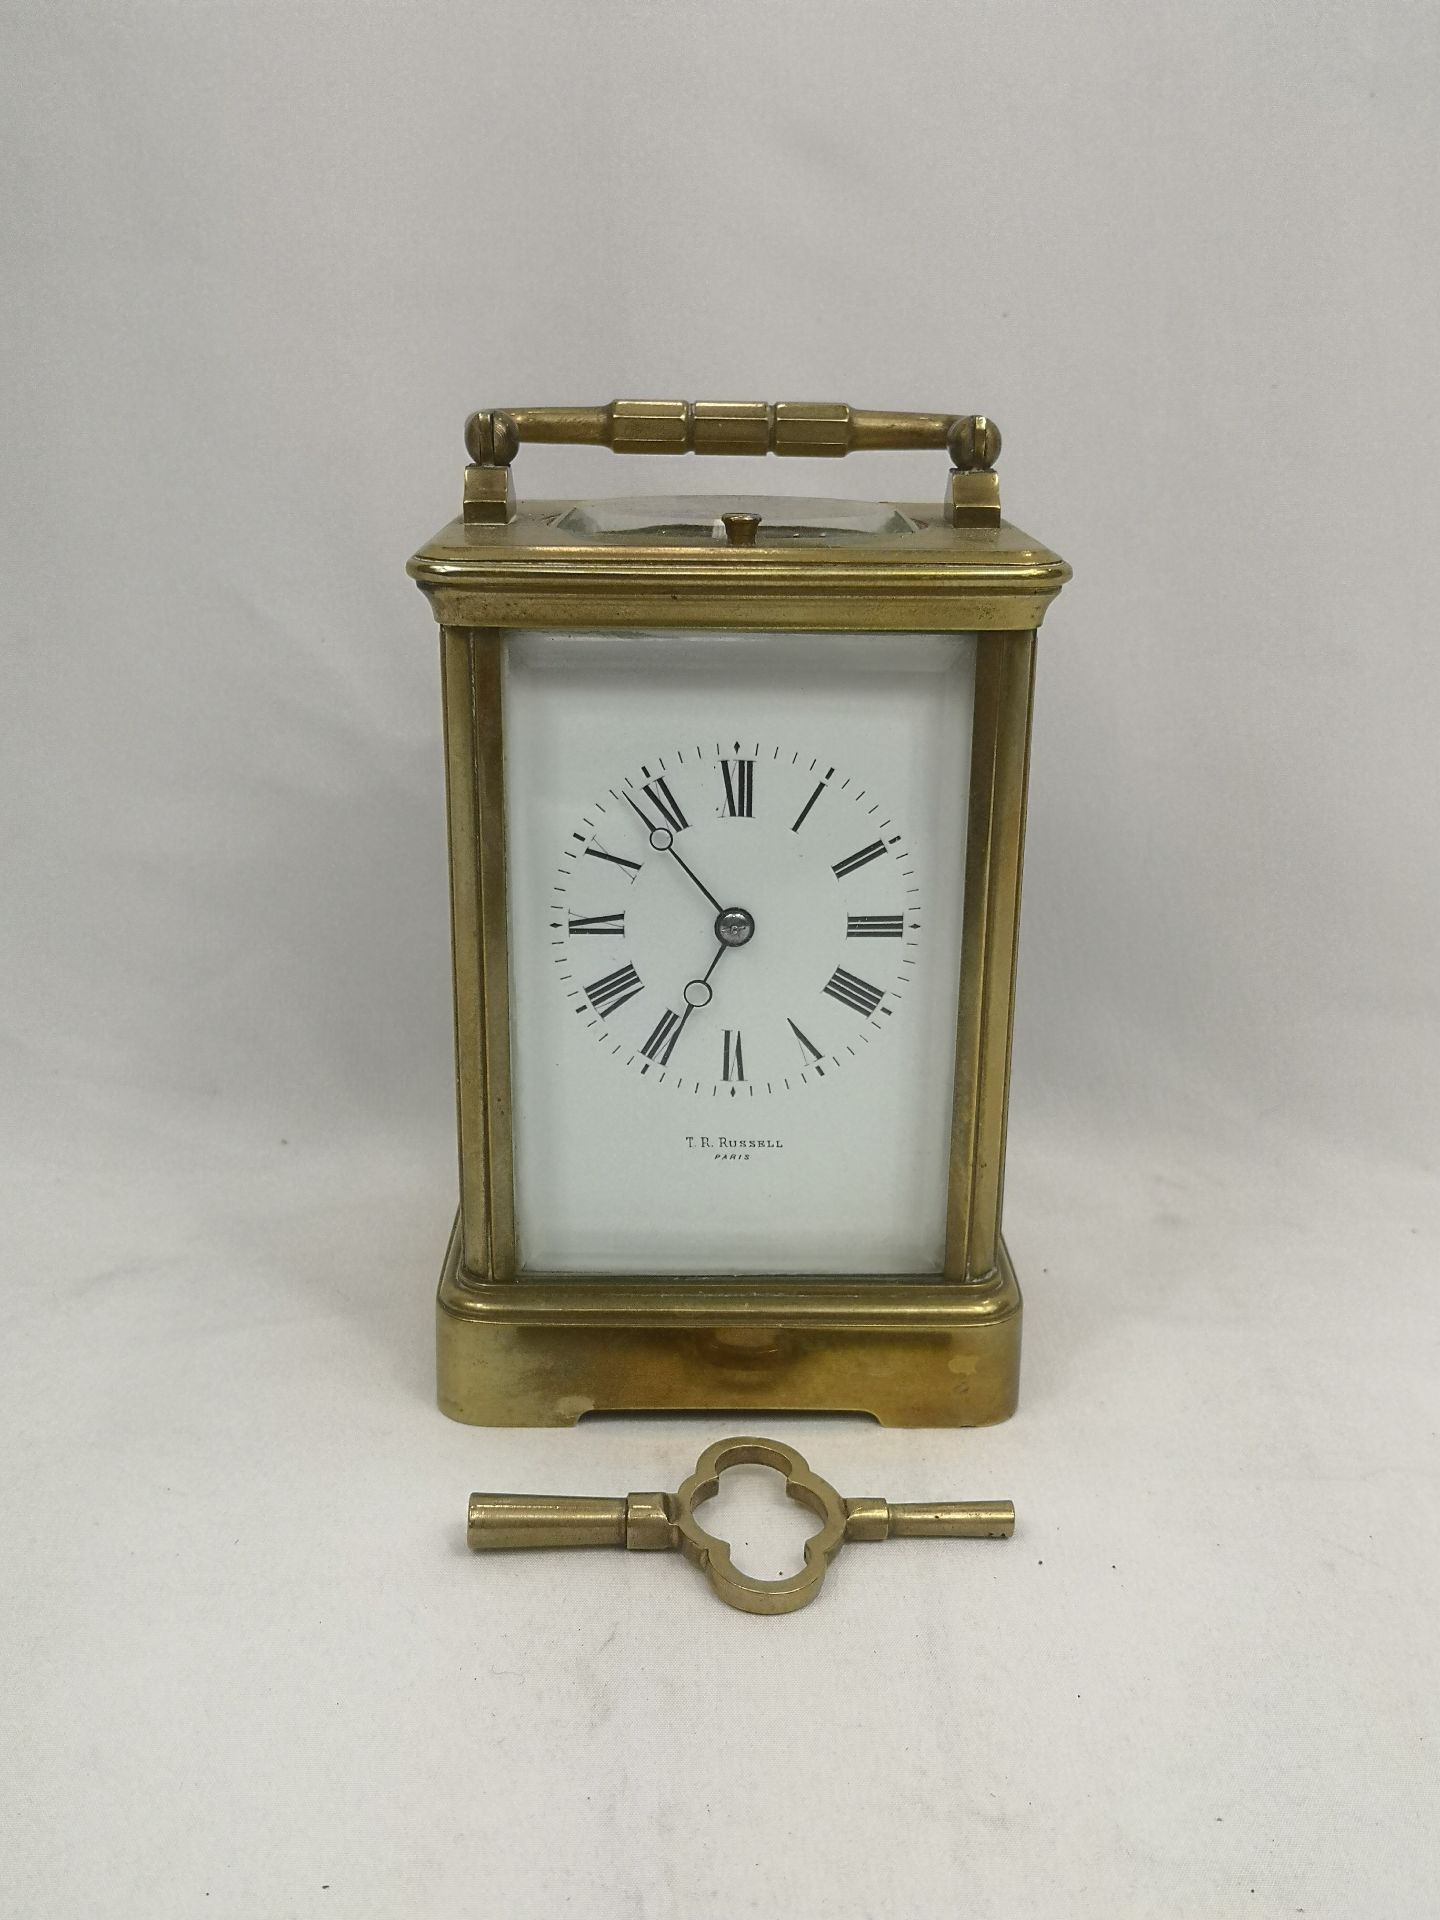 Brass carriage clock written to face T.R. Russell